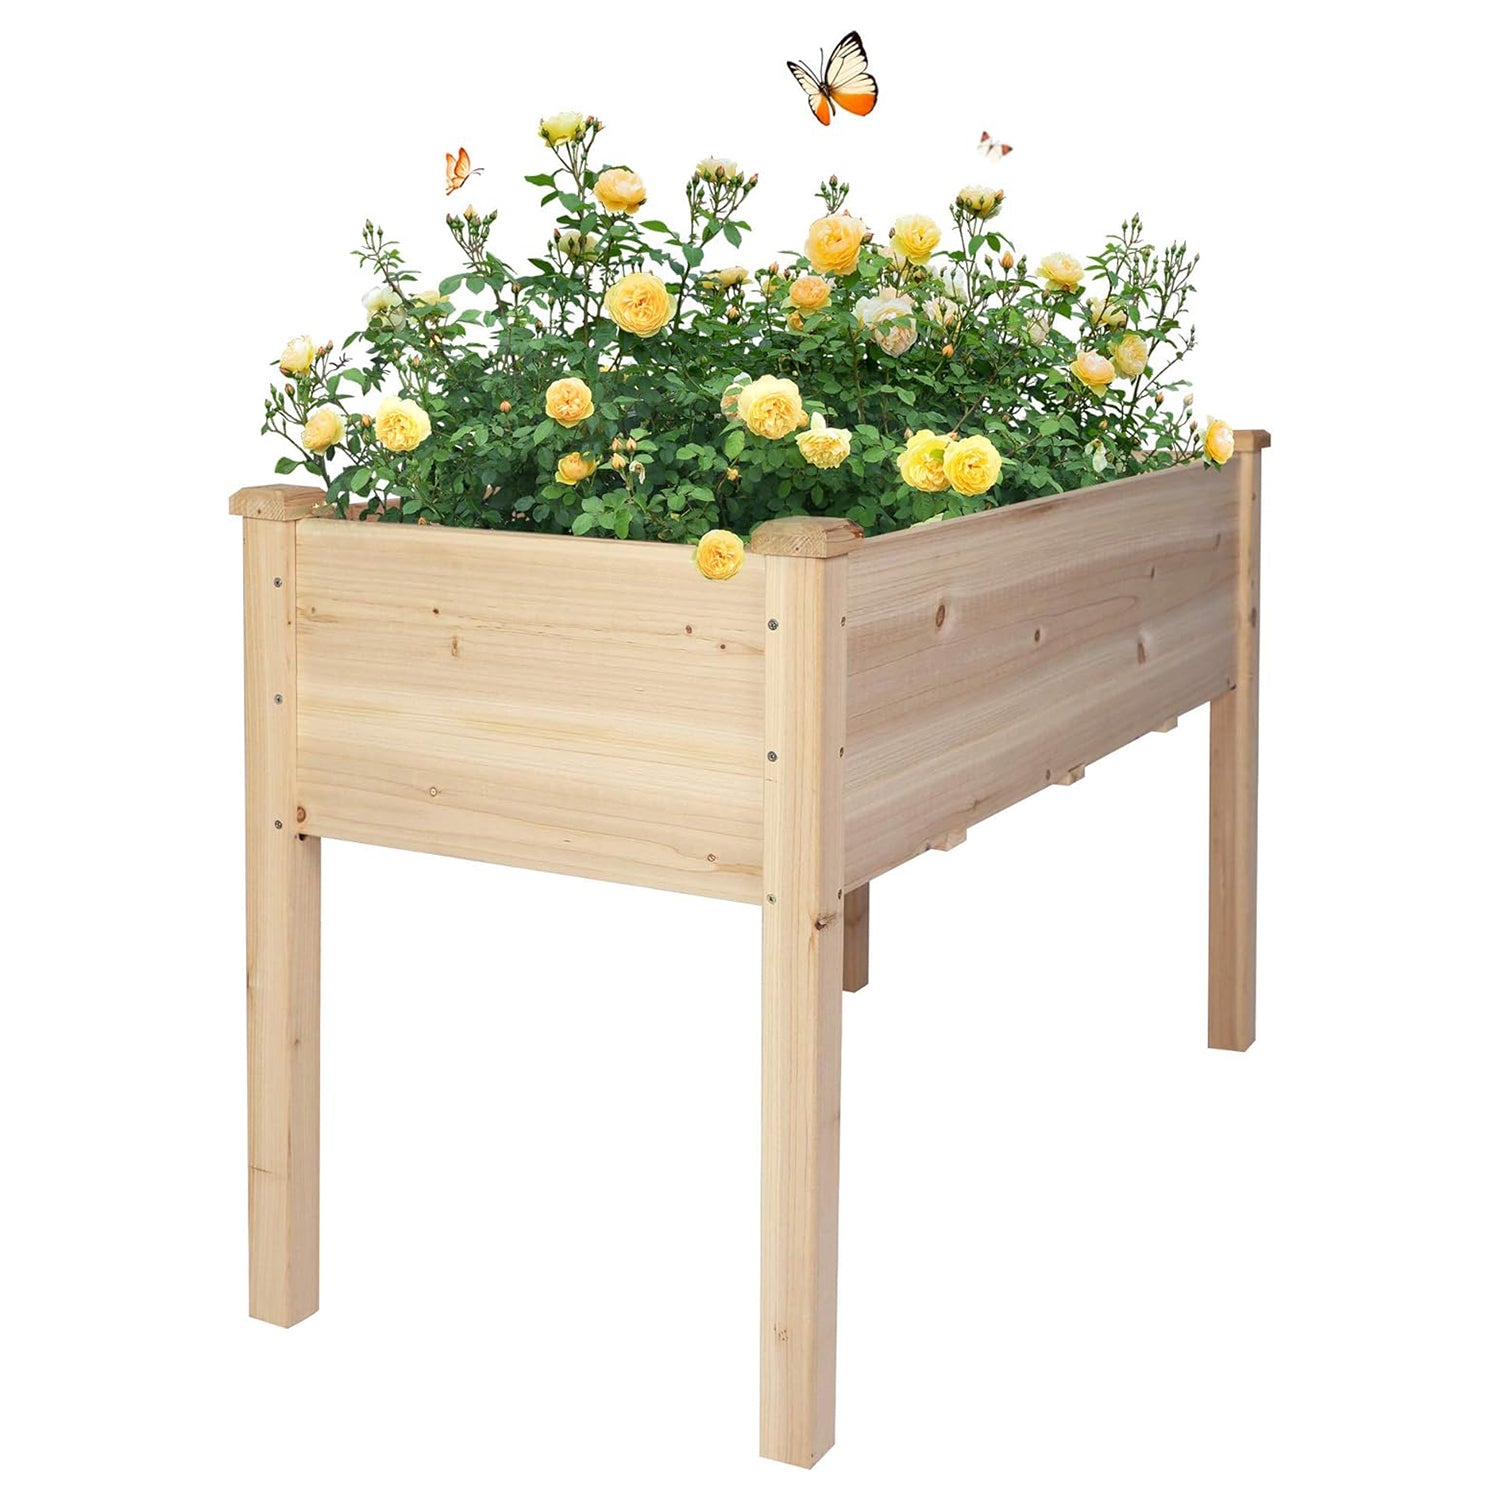 47.2"x21.6"x29.5" Raised Garden Bed Standing Elevated Planter Wooden Box with Drain Hole